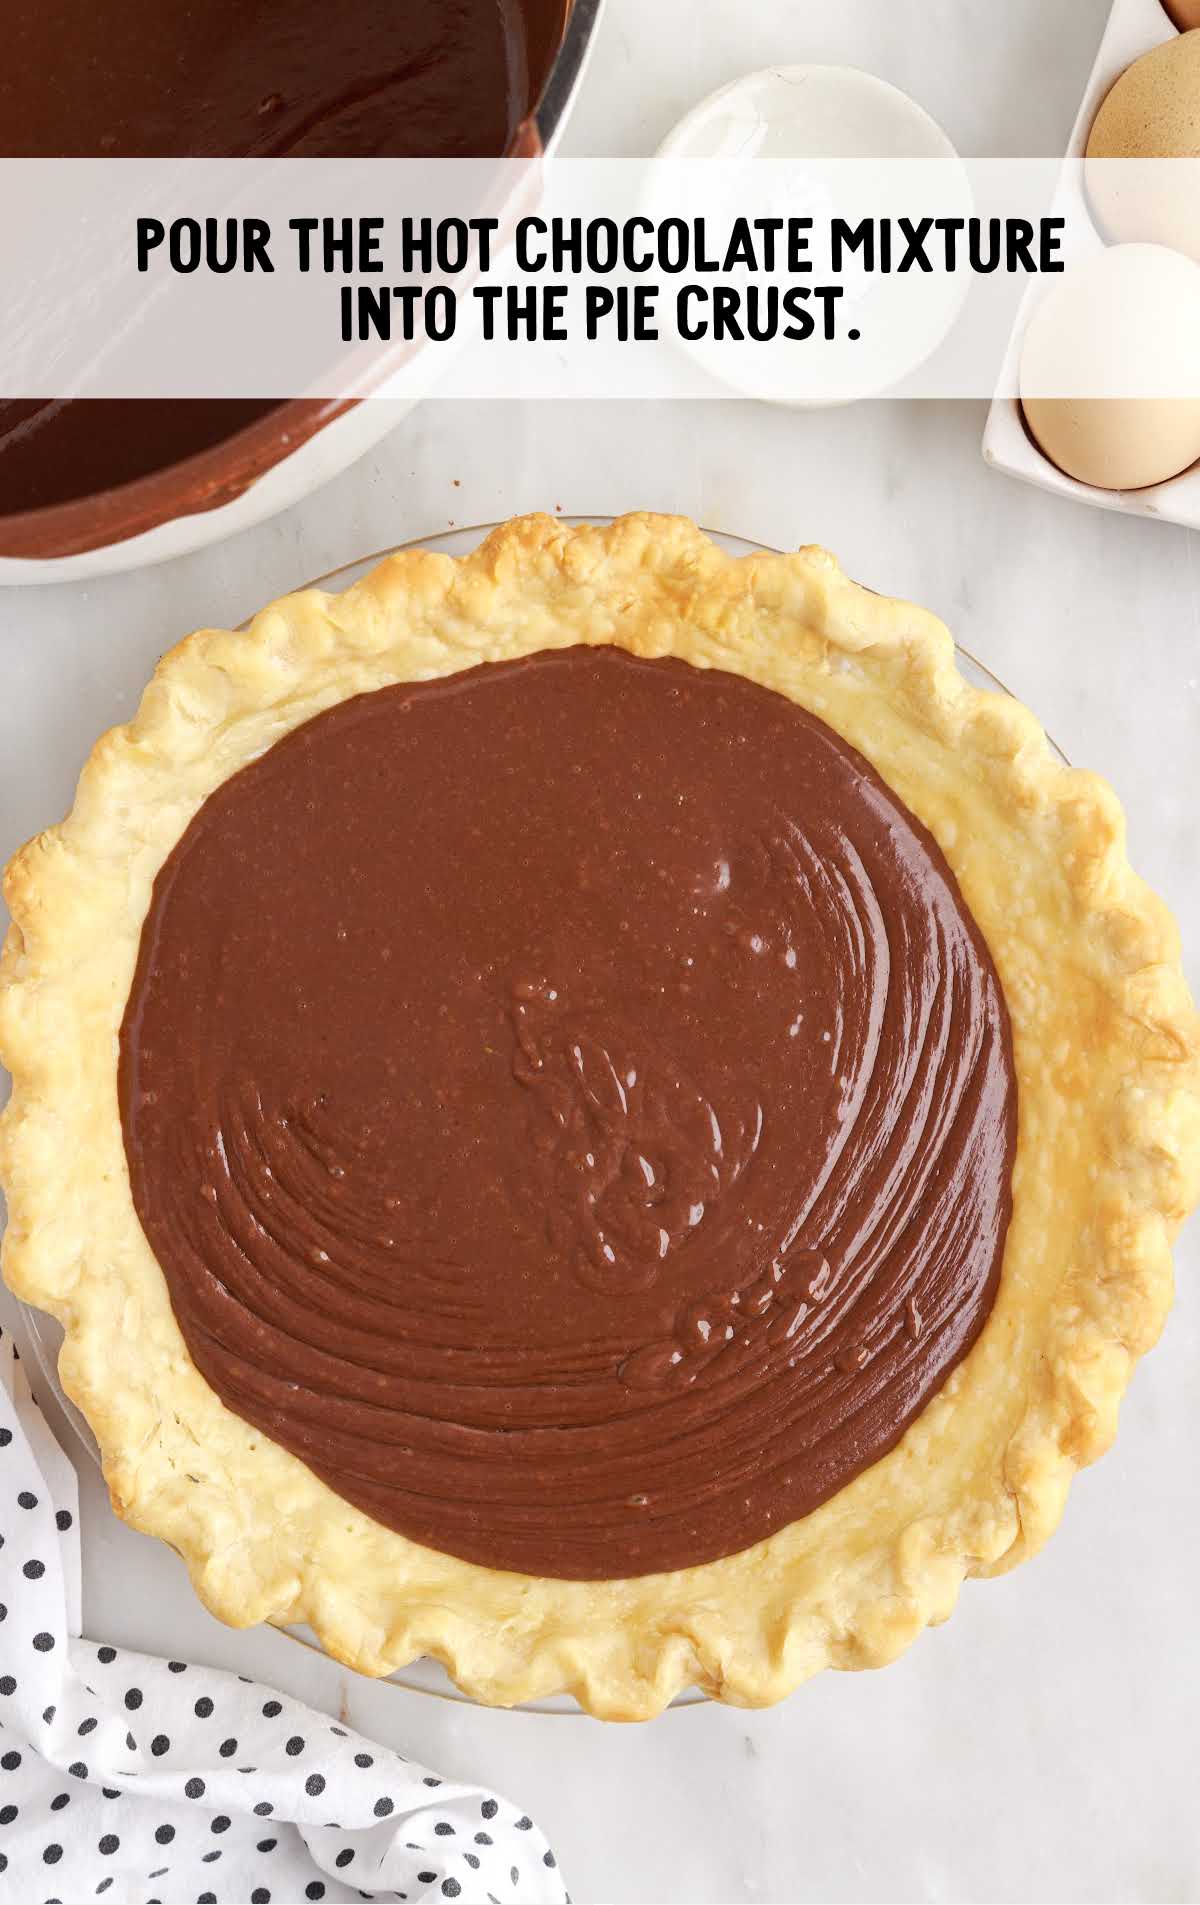 chocolate mixture poured into the pie crust